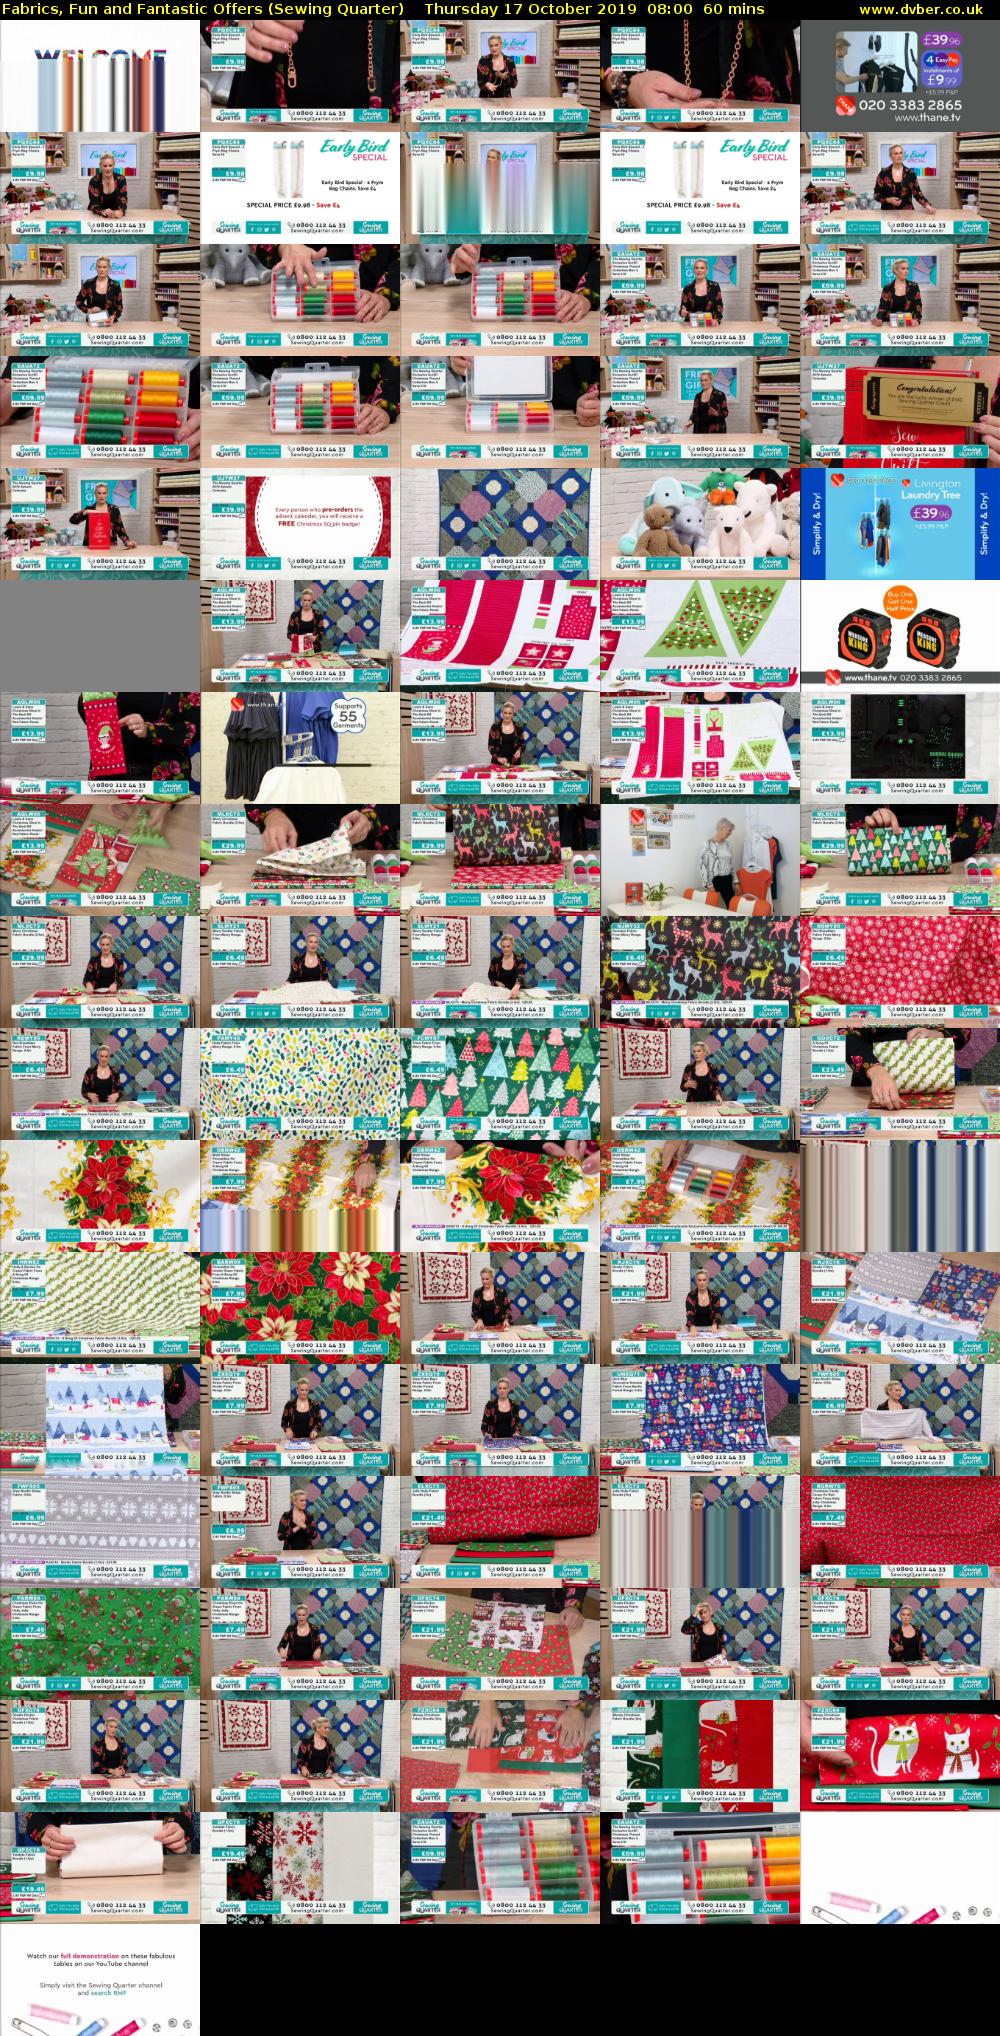 Fabrics, Fun and Fantastic Offers (Sewing Quarter) Thursday 17 October 2019 08:00 - 09:00